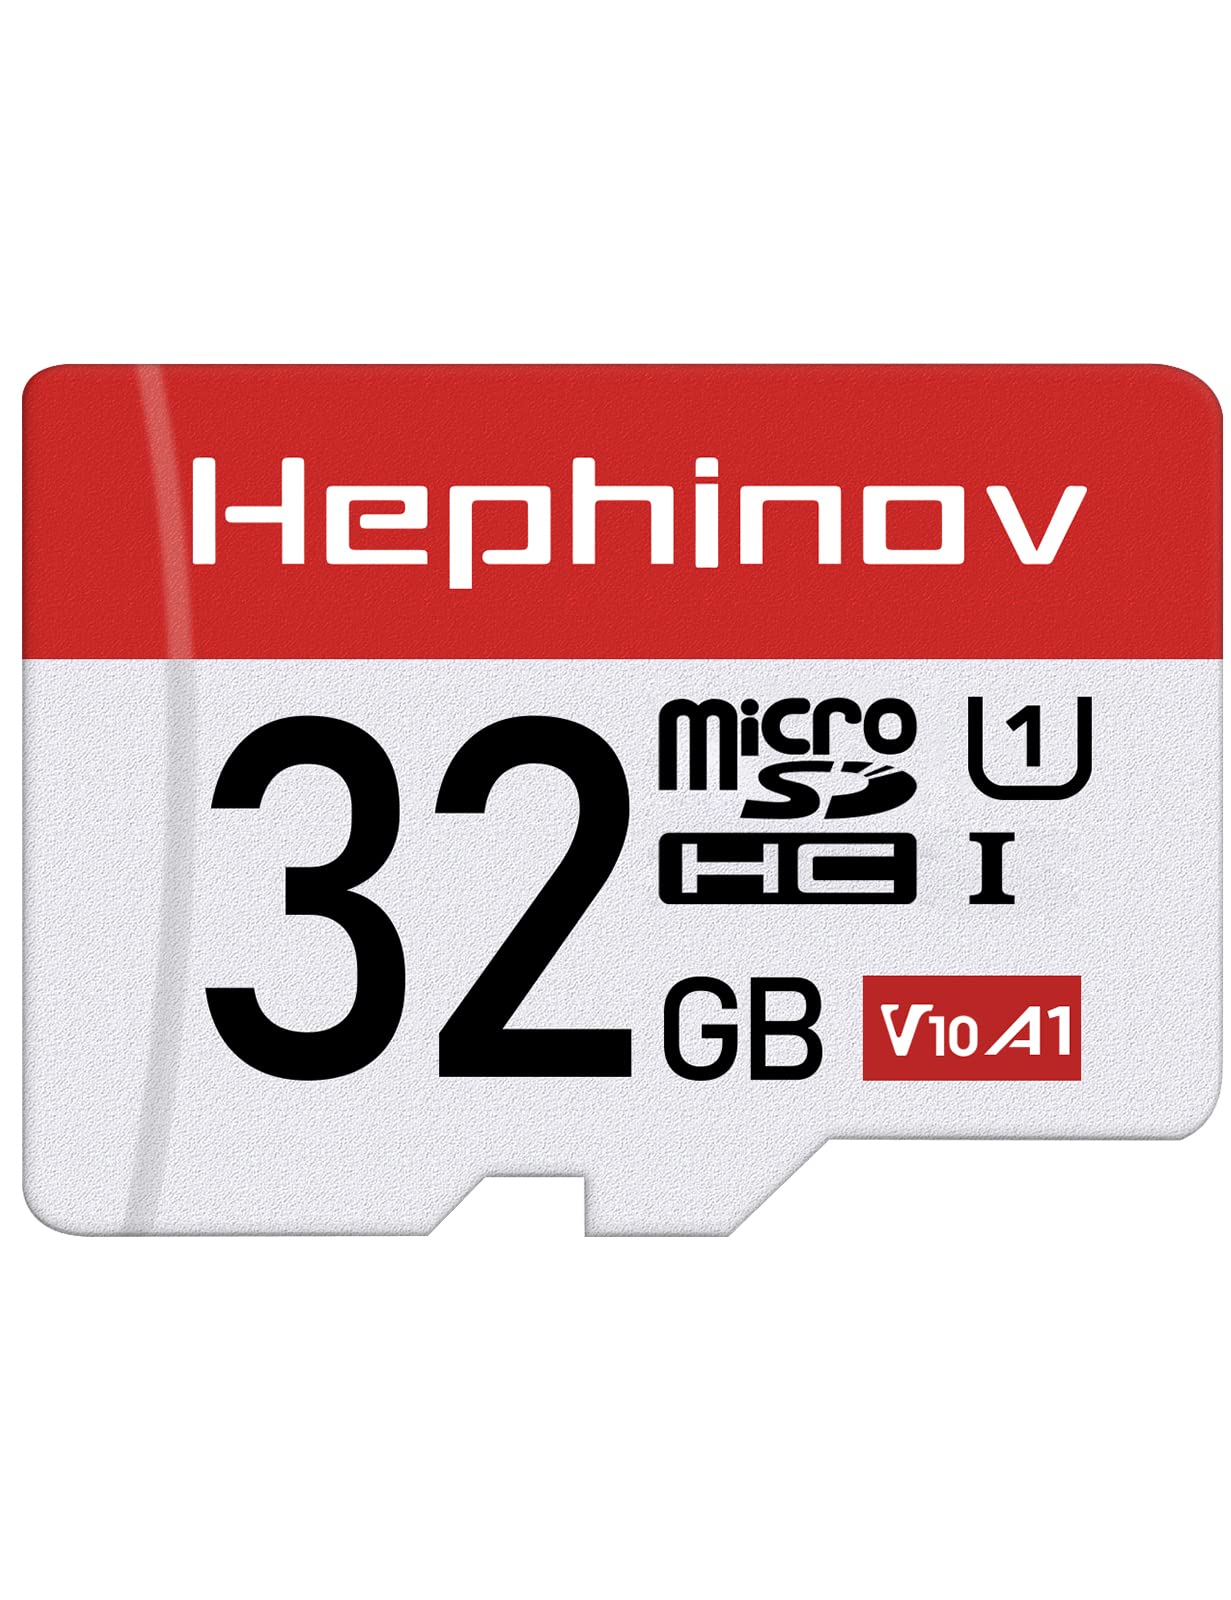 Hephinov Micro SD Card, 32GB MicroSDHC Up to 90MB/s(R) + SD Adapter with A1, C10, U1, V10, Full HD, Memory Card for Camera, Smartphone, Drone, Dash Cam, Gopro